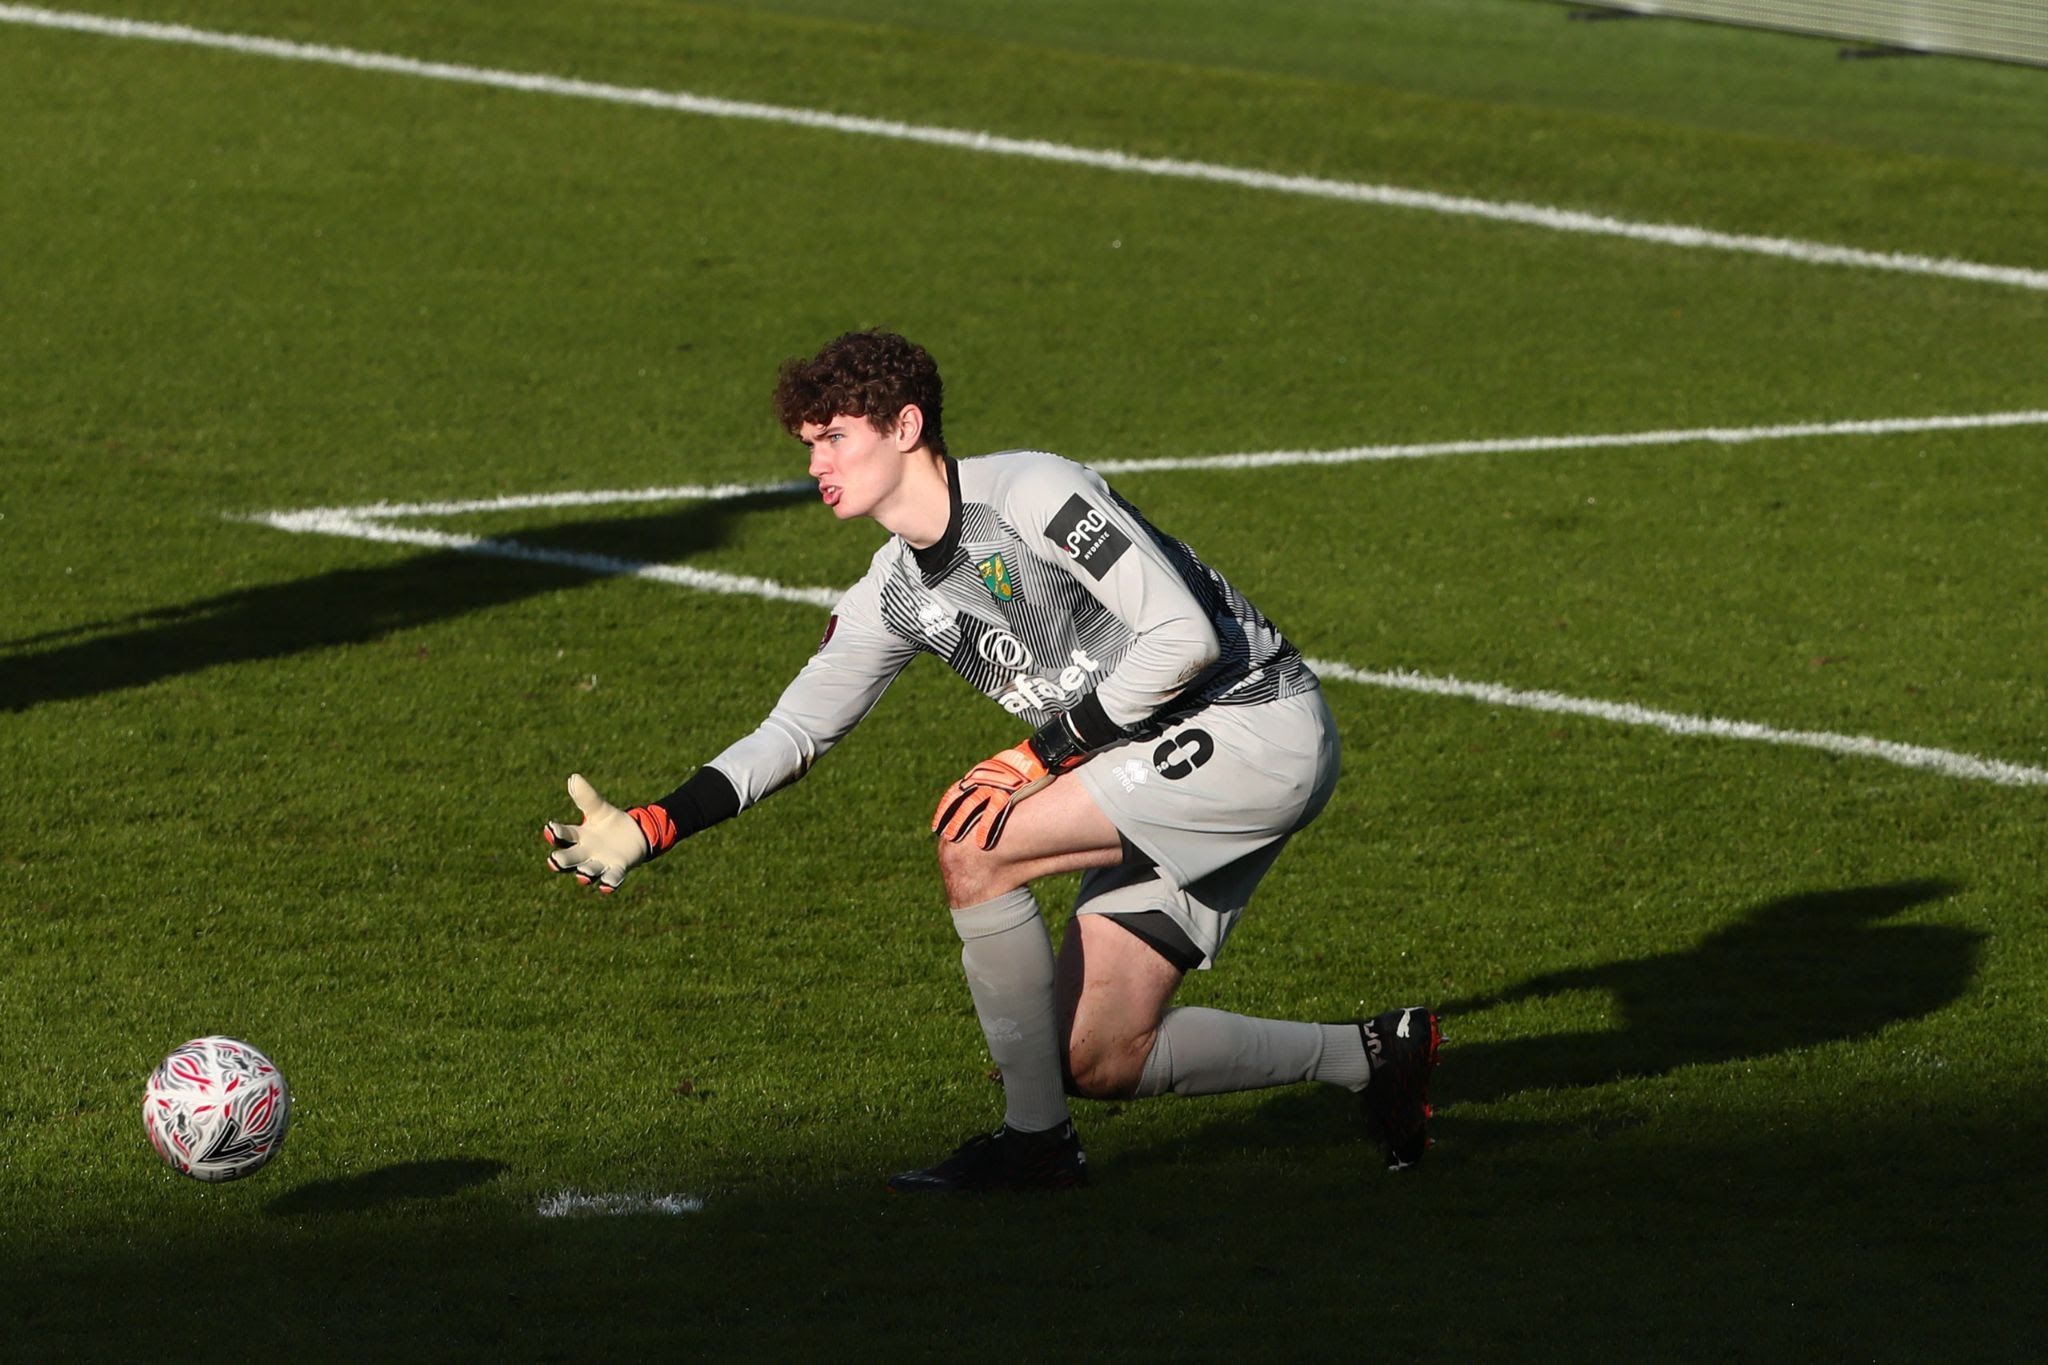 Norwich goalie Dan Barden diagnosed with testicular cancer